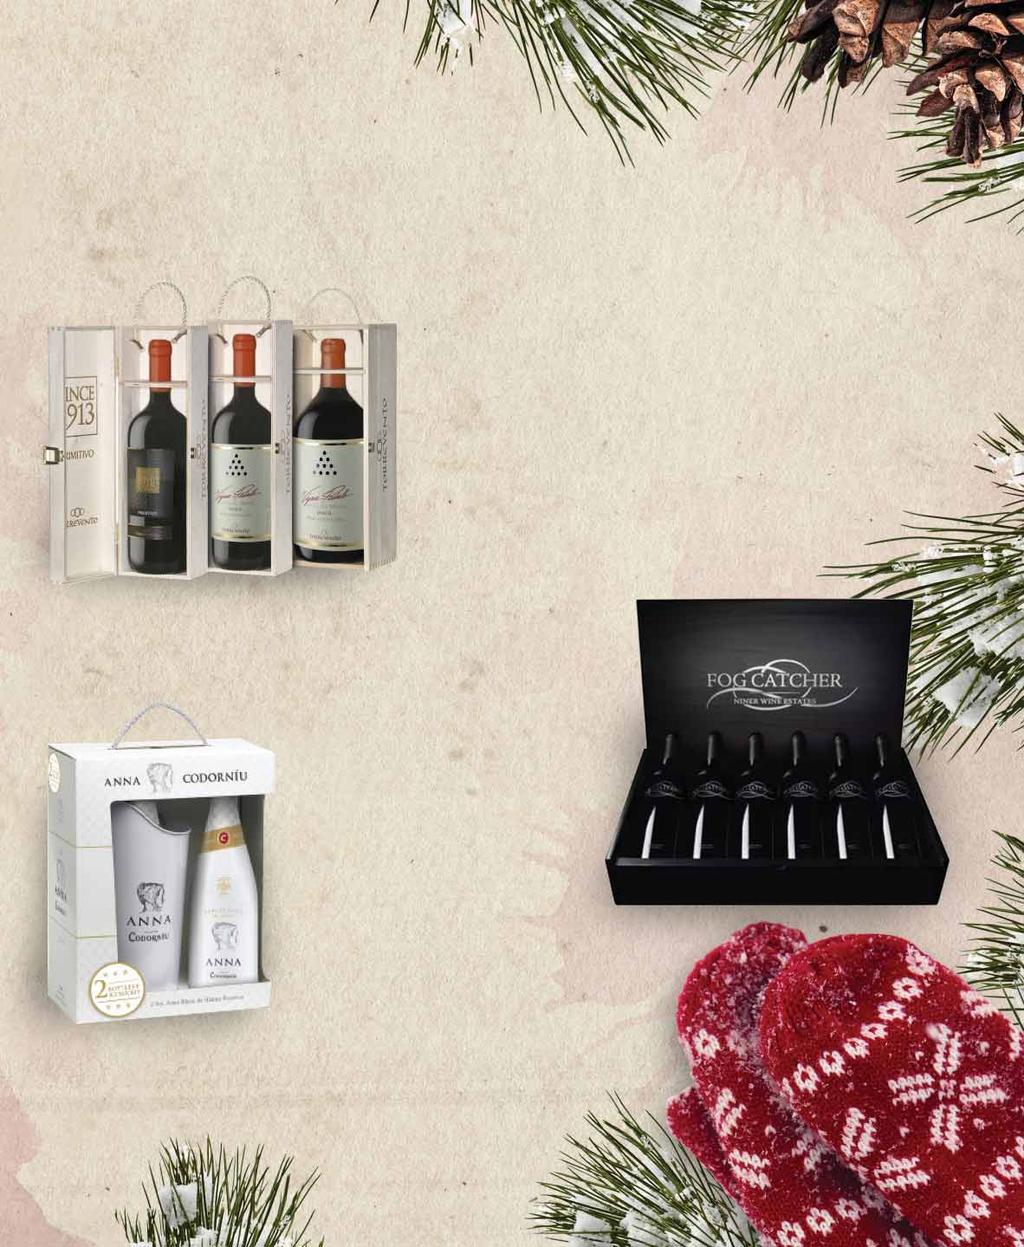 for Holiday Celebrations Limited Quantities Available, Ask your Sales Consultant Coming Soon Torrevento Vigna Pedale Wood Gift Box 3 l Torrevento Since 1913 Primitivo Wood Gift Box Torrevento Vigna